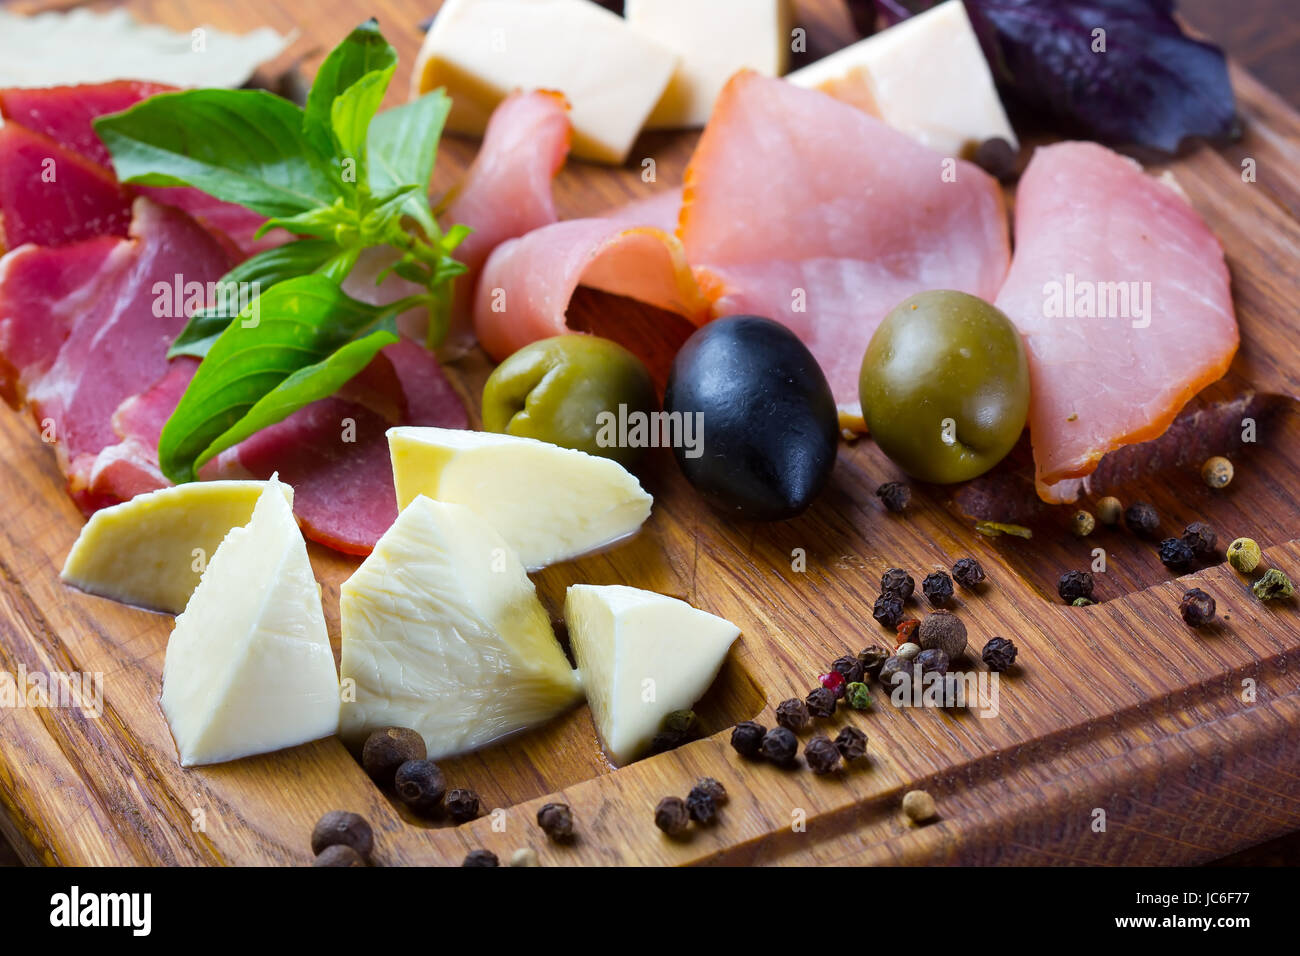 Prosciutto and mozzarella slices with olives ans spices, served on a wooden desk Stock Photo